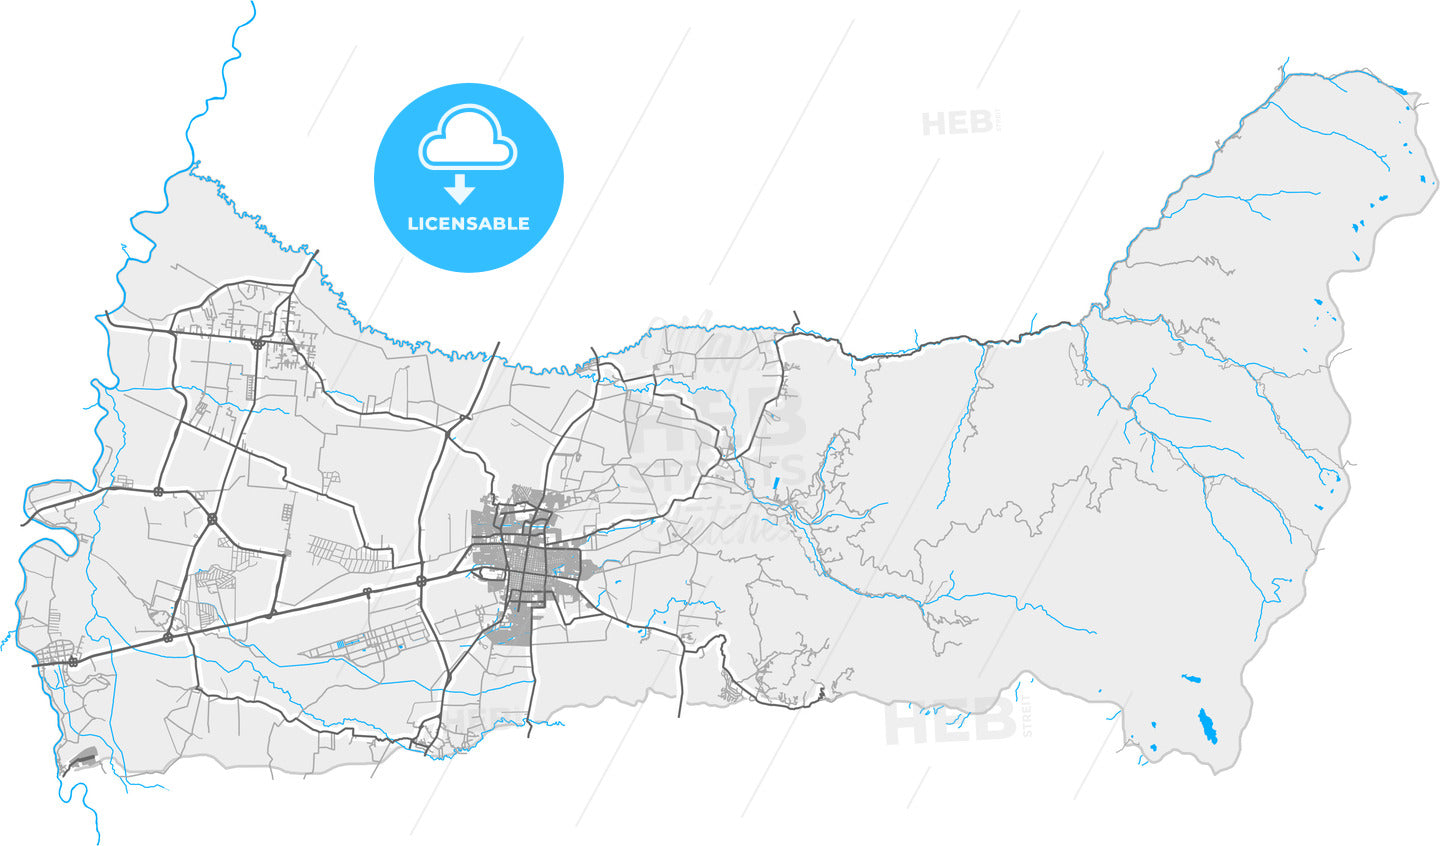 Palmira, Colombia, high quality vector map